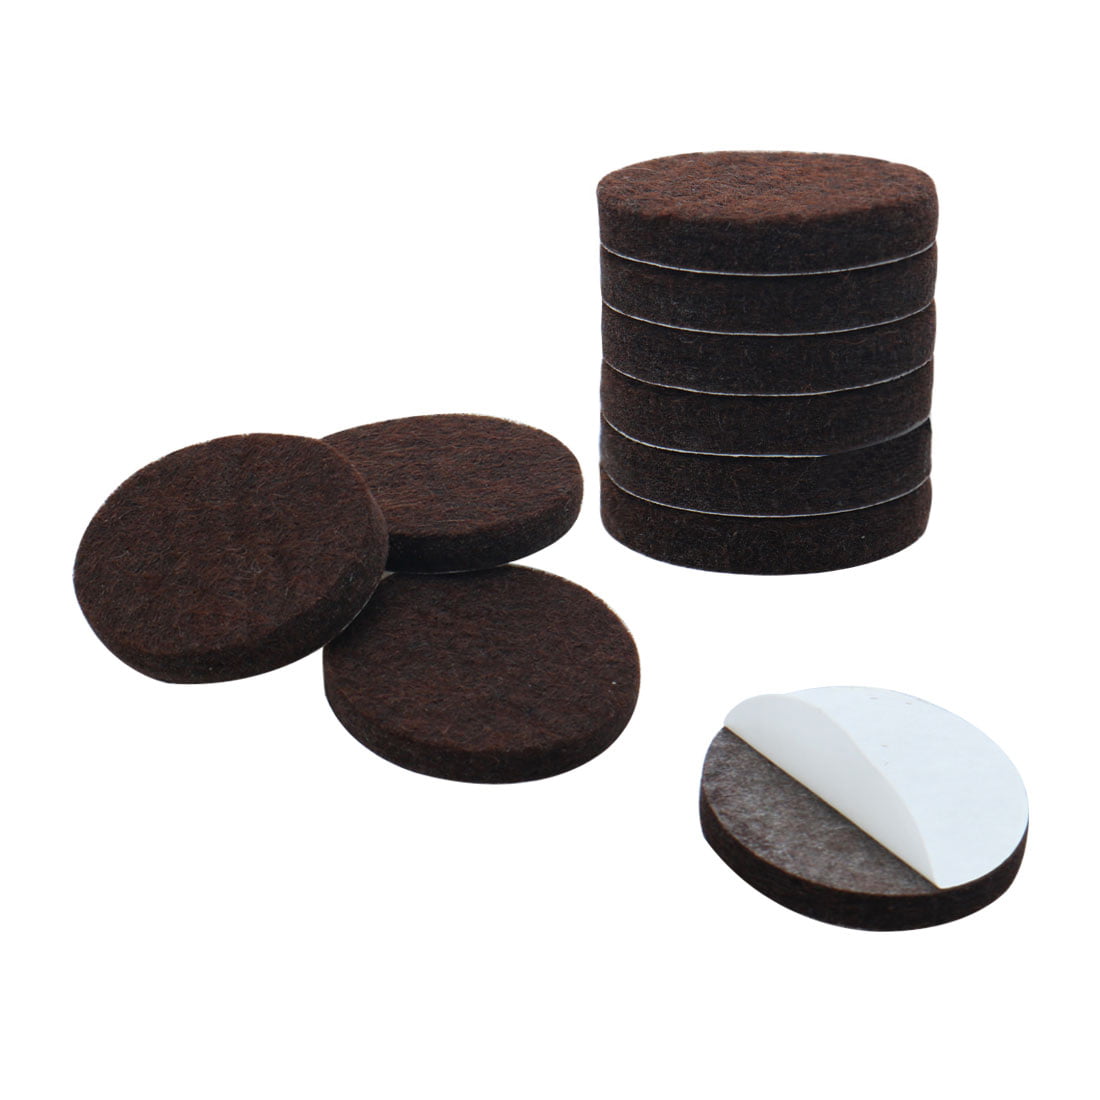 10pcs Felt Furniture Pads Round 1" Floor Protector for ...